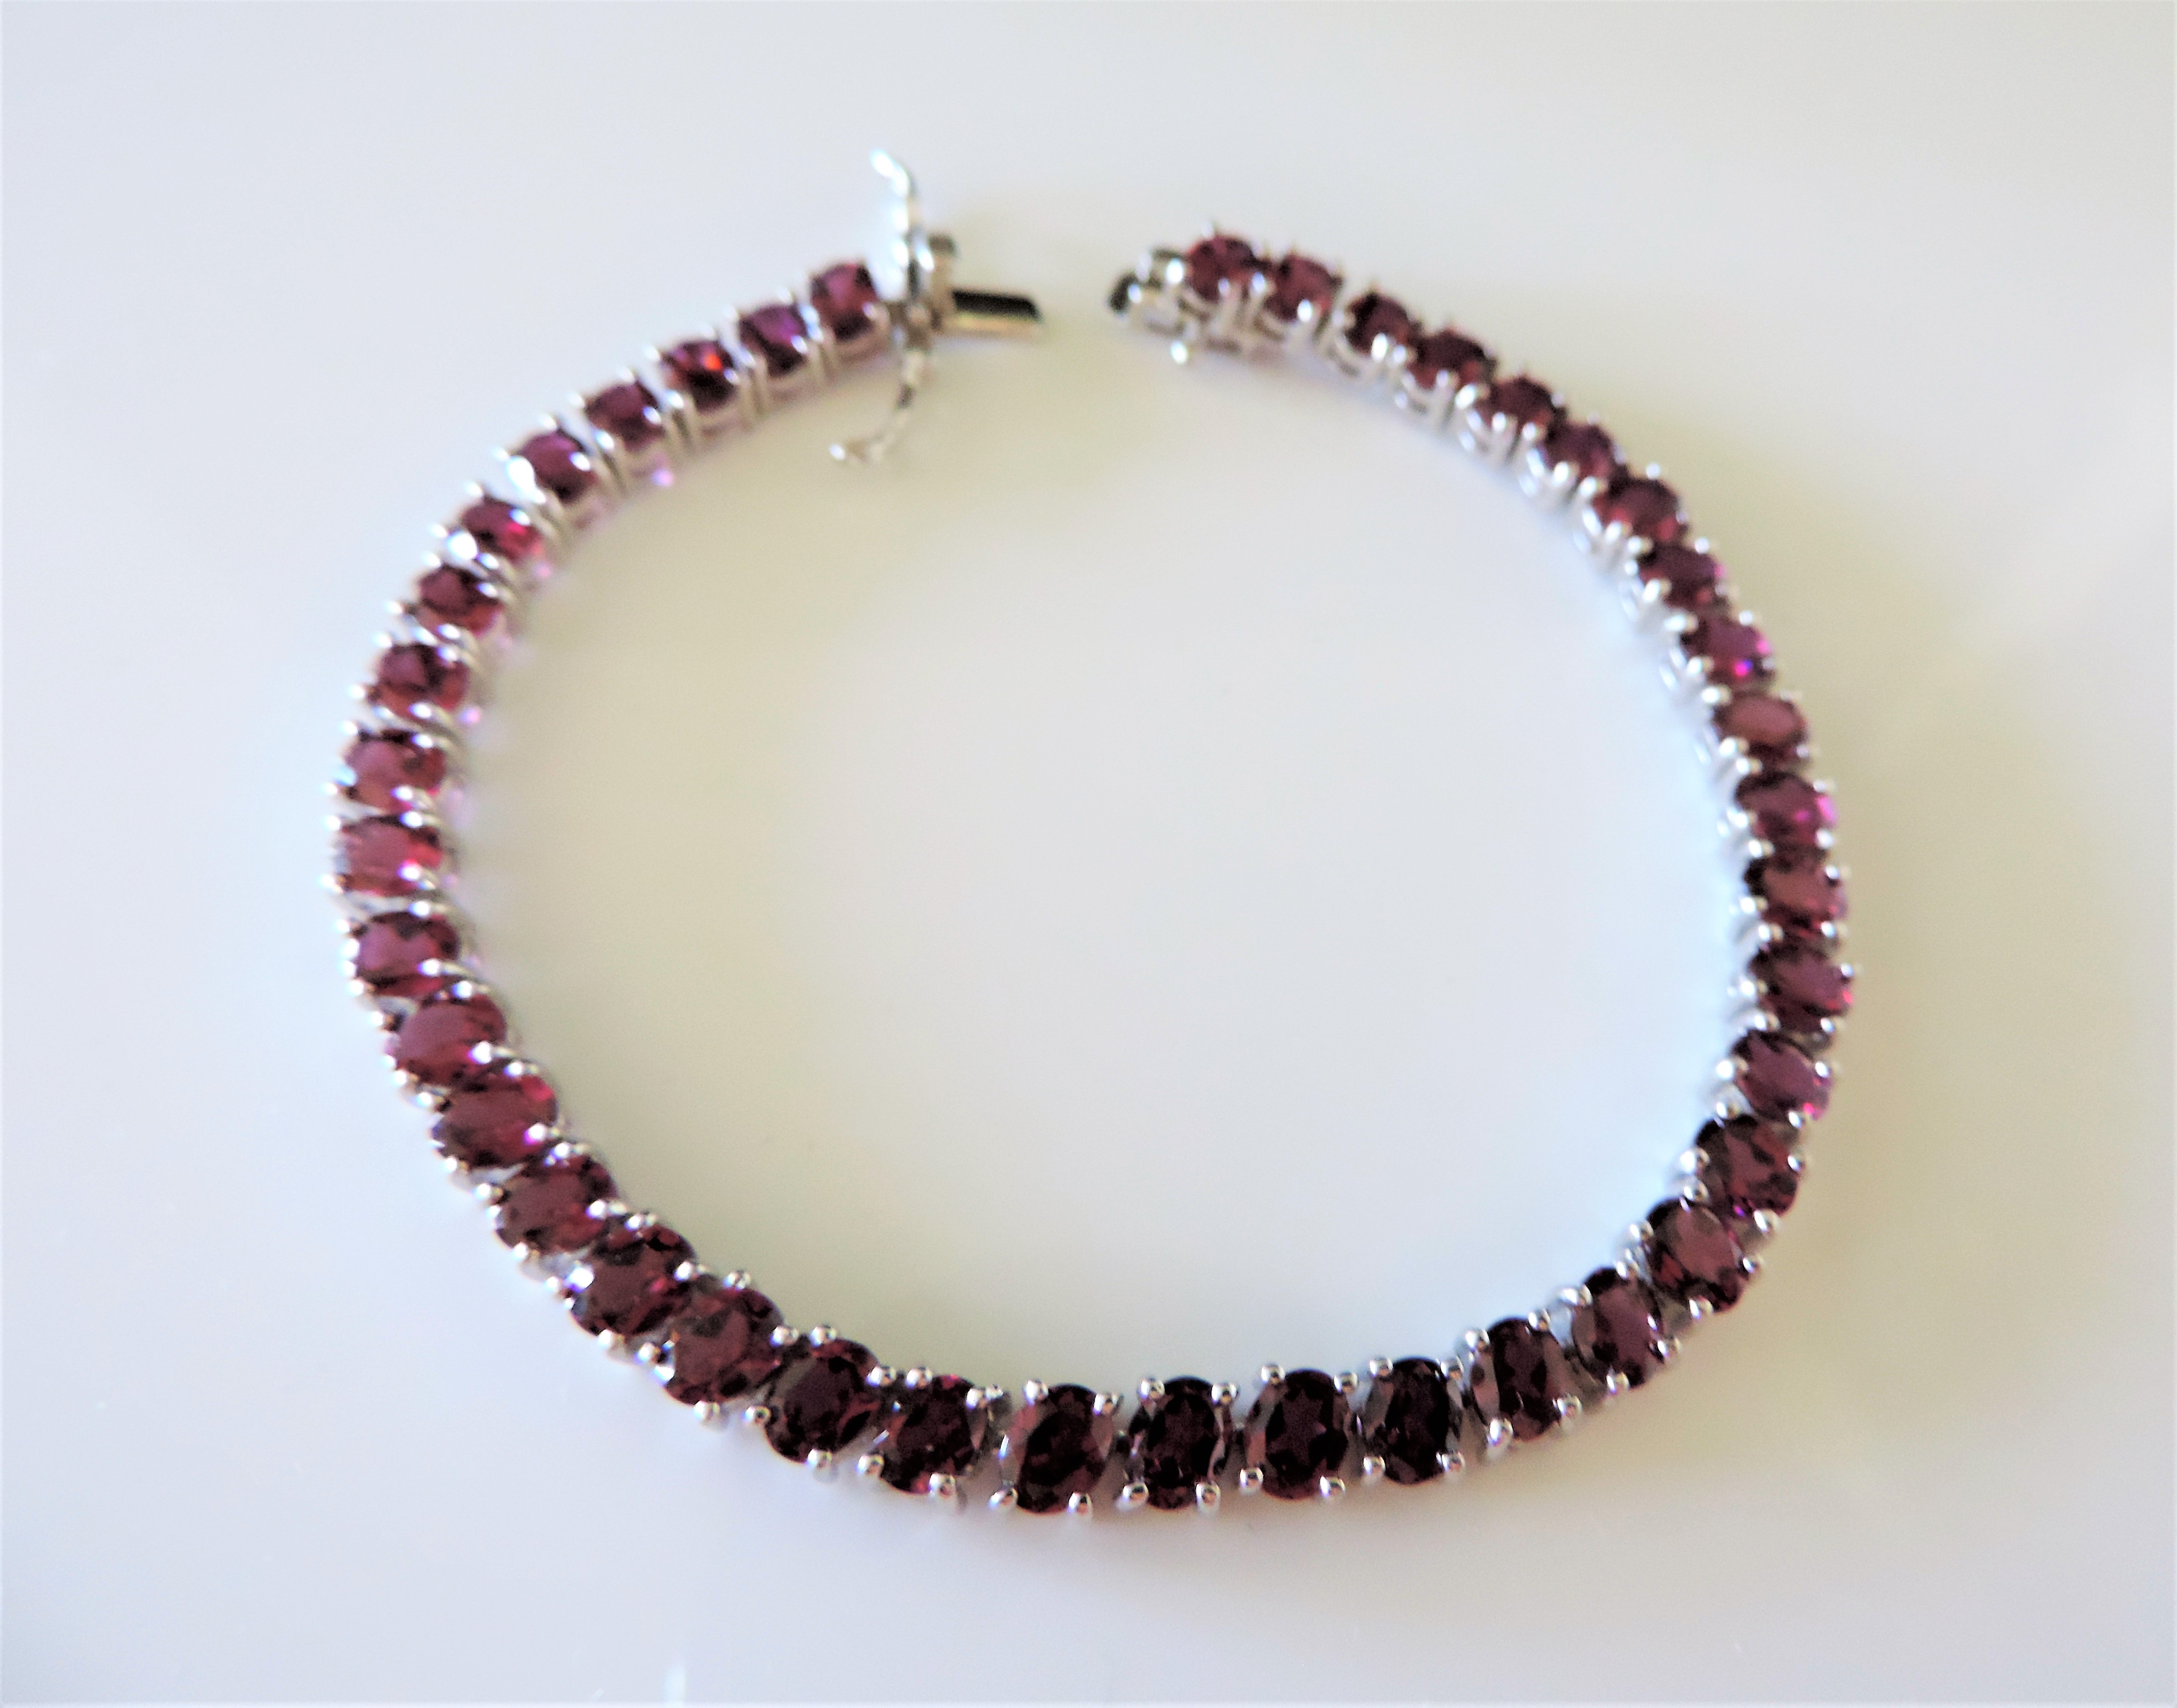 20ct Pink Tourmaline Tennis Bracelet in Sterling Silver - Image 4 of 6